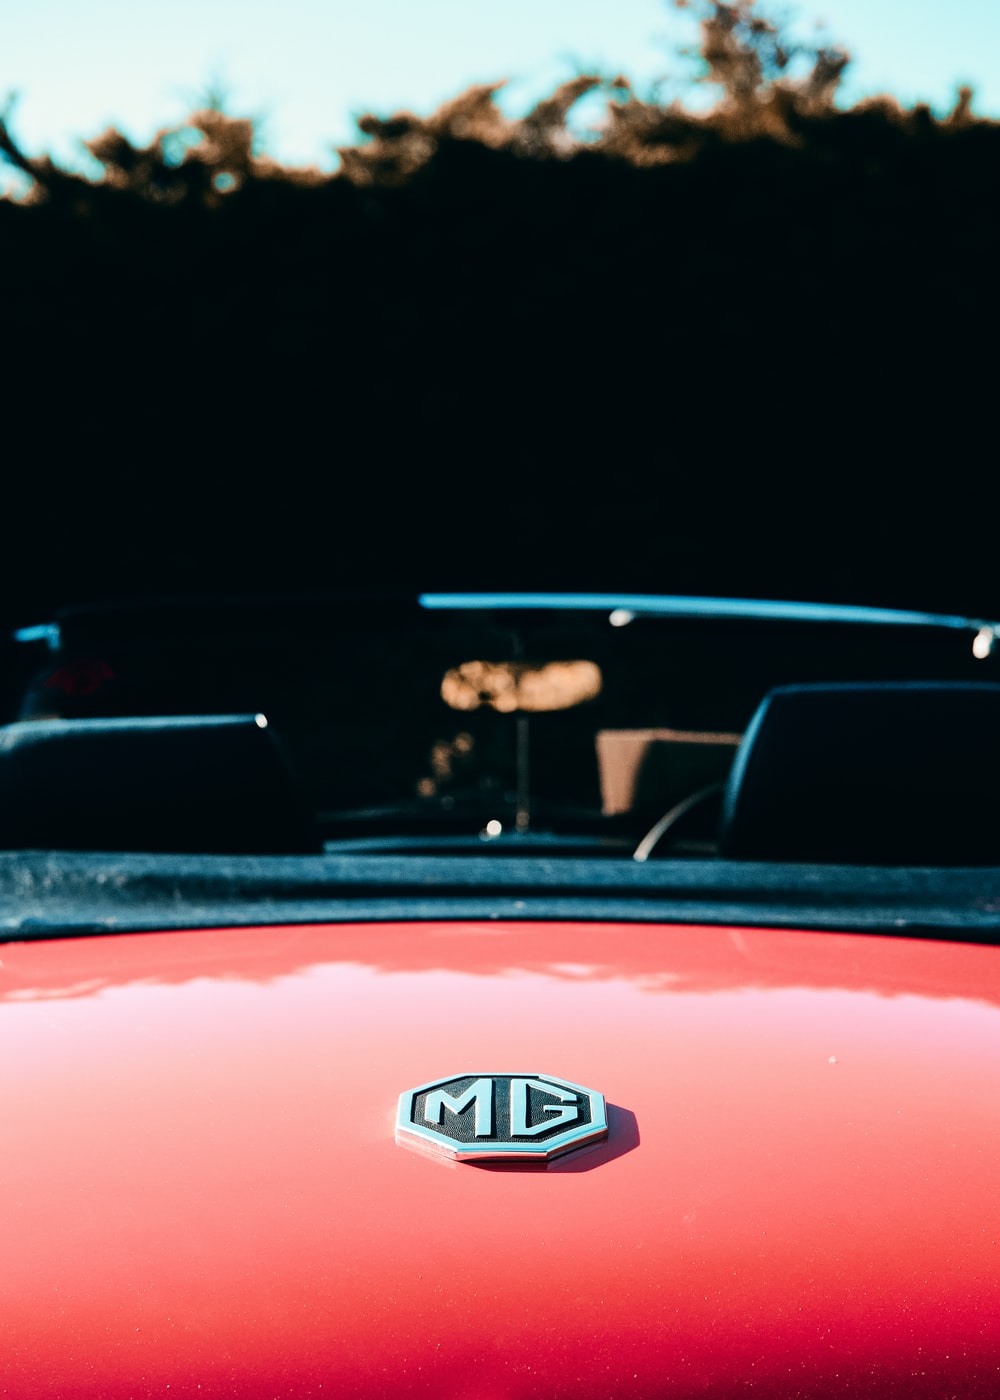 Mg Car Picture. Download Free Image